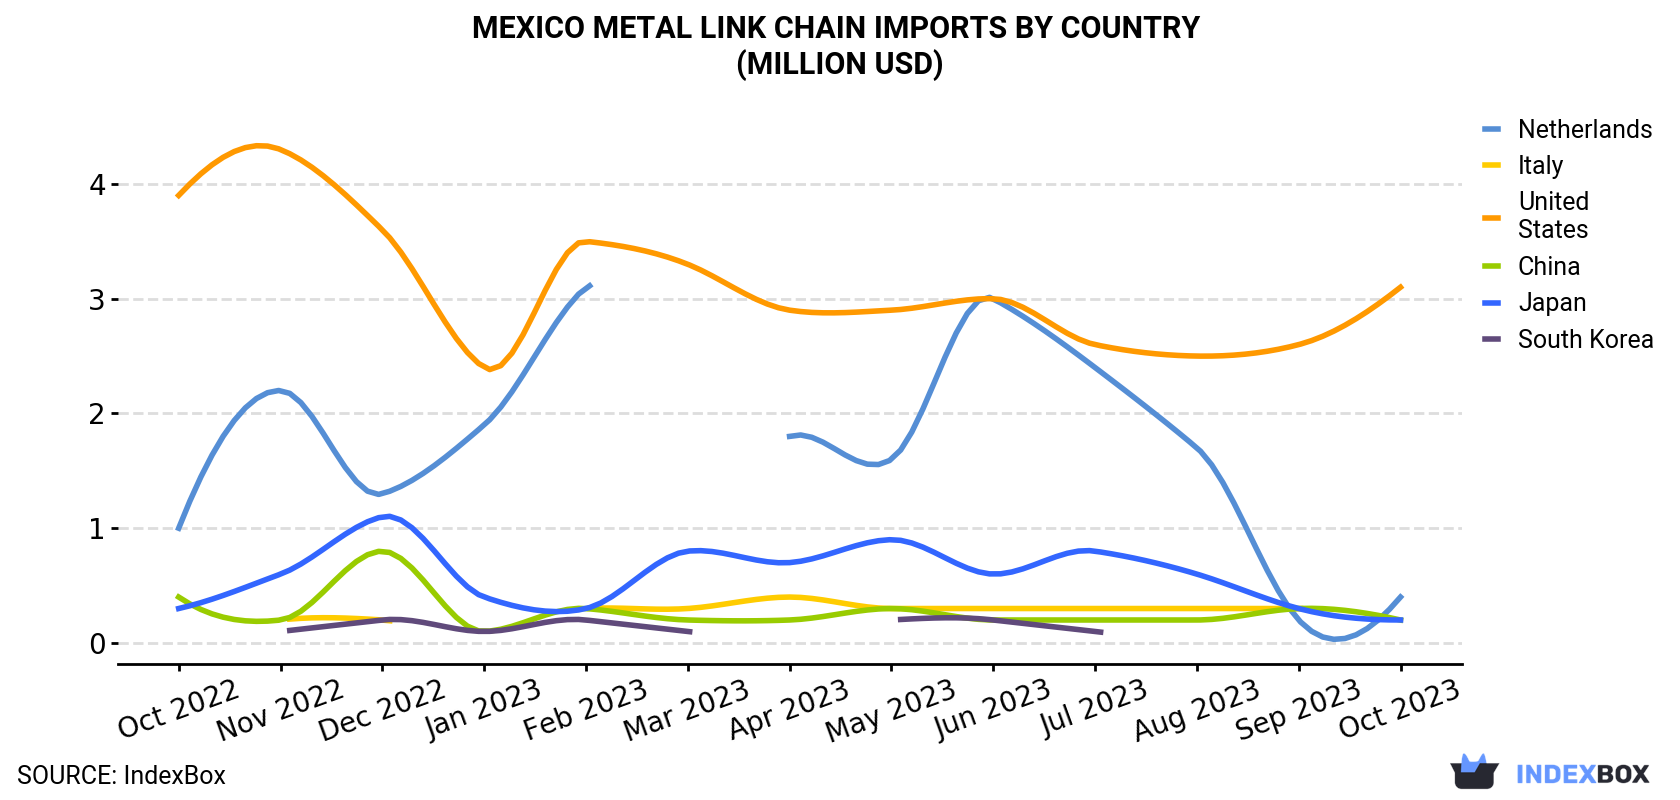 Mexico Metal Link Chain Imports By Country (Million USD)